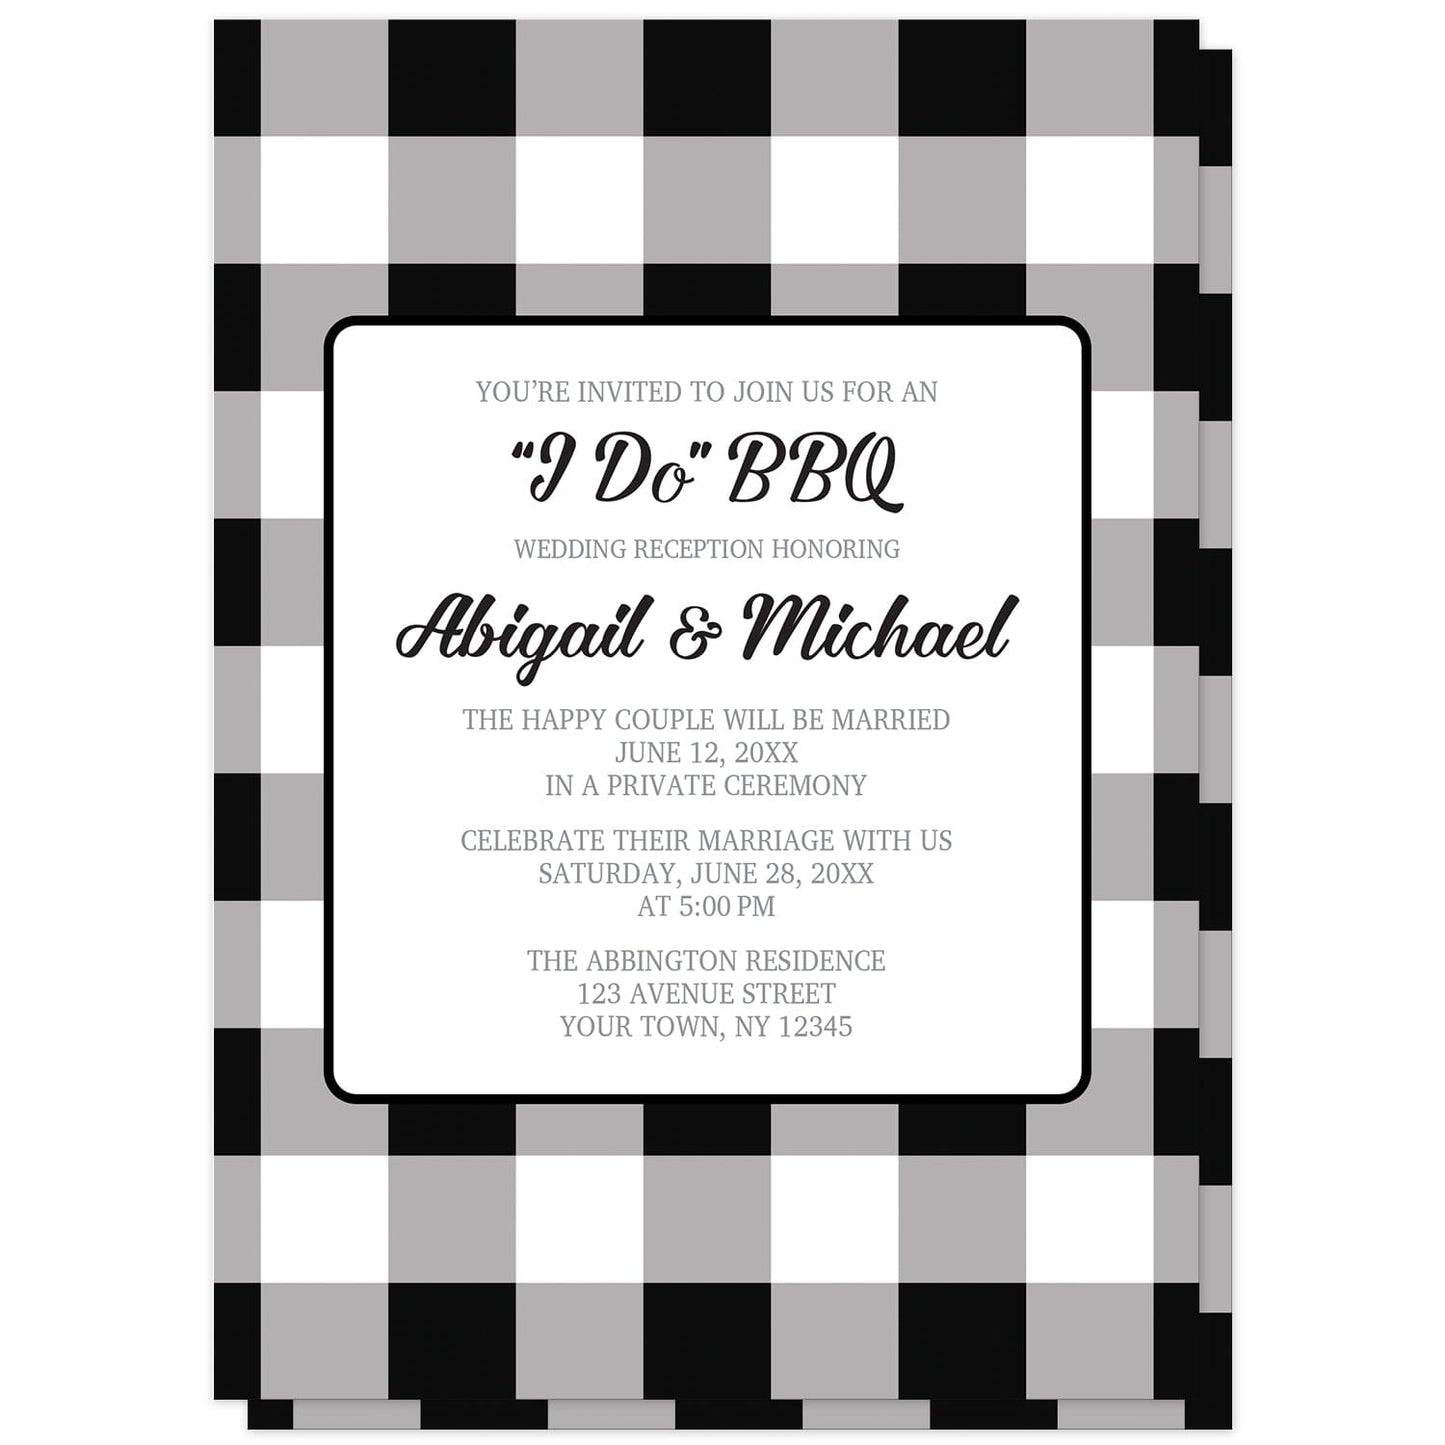 Black and White Buffalo Plaid I Do BBQ Reception Only Invitations at Artistically Invited. Buffalo plaid I Do BBQ reception only invitations with your personalized post-wedding reception details custom printed in black and gray inside a white rectangular area outlined in black. The background design is a black and white buffalo plaid (buffalo check) pattern which is also printed on the back side. 